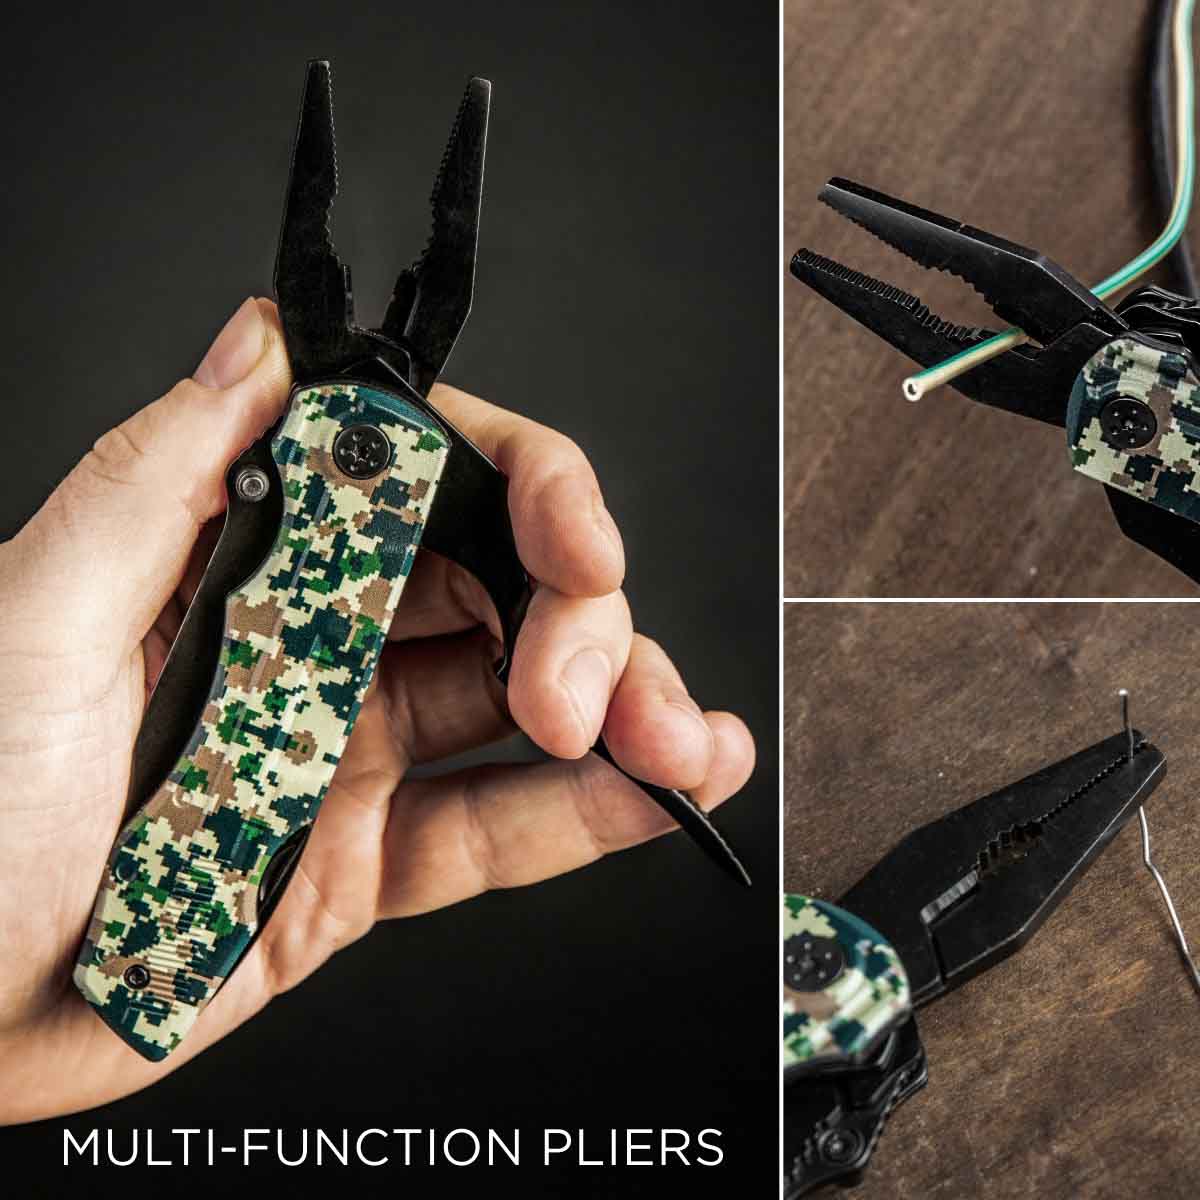 Portable 14-in-1 DIY Multitool with Wire Cutter, Pilers, Knife boasts high-quality pliers